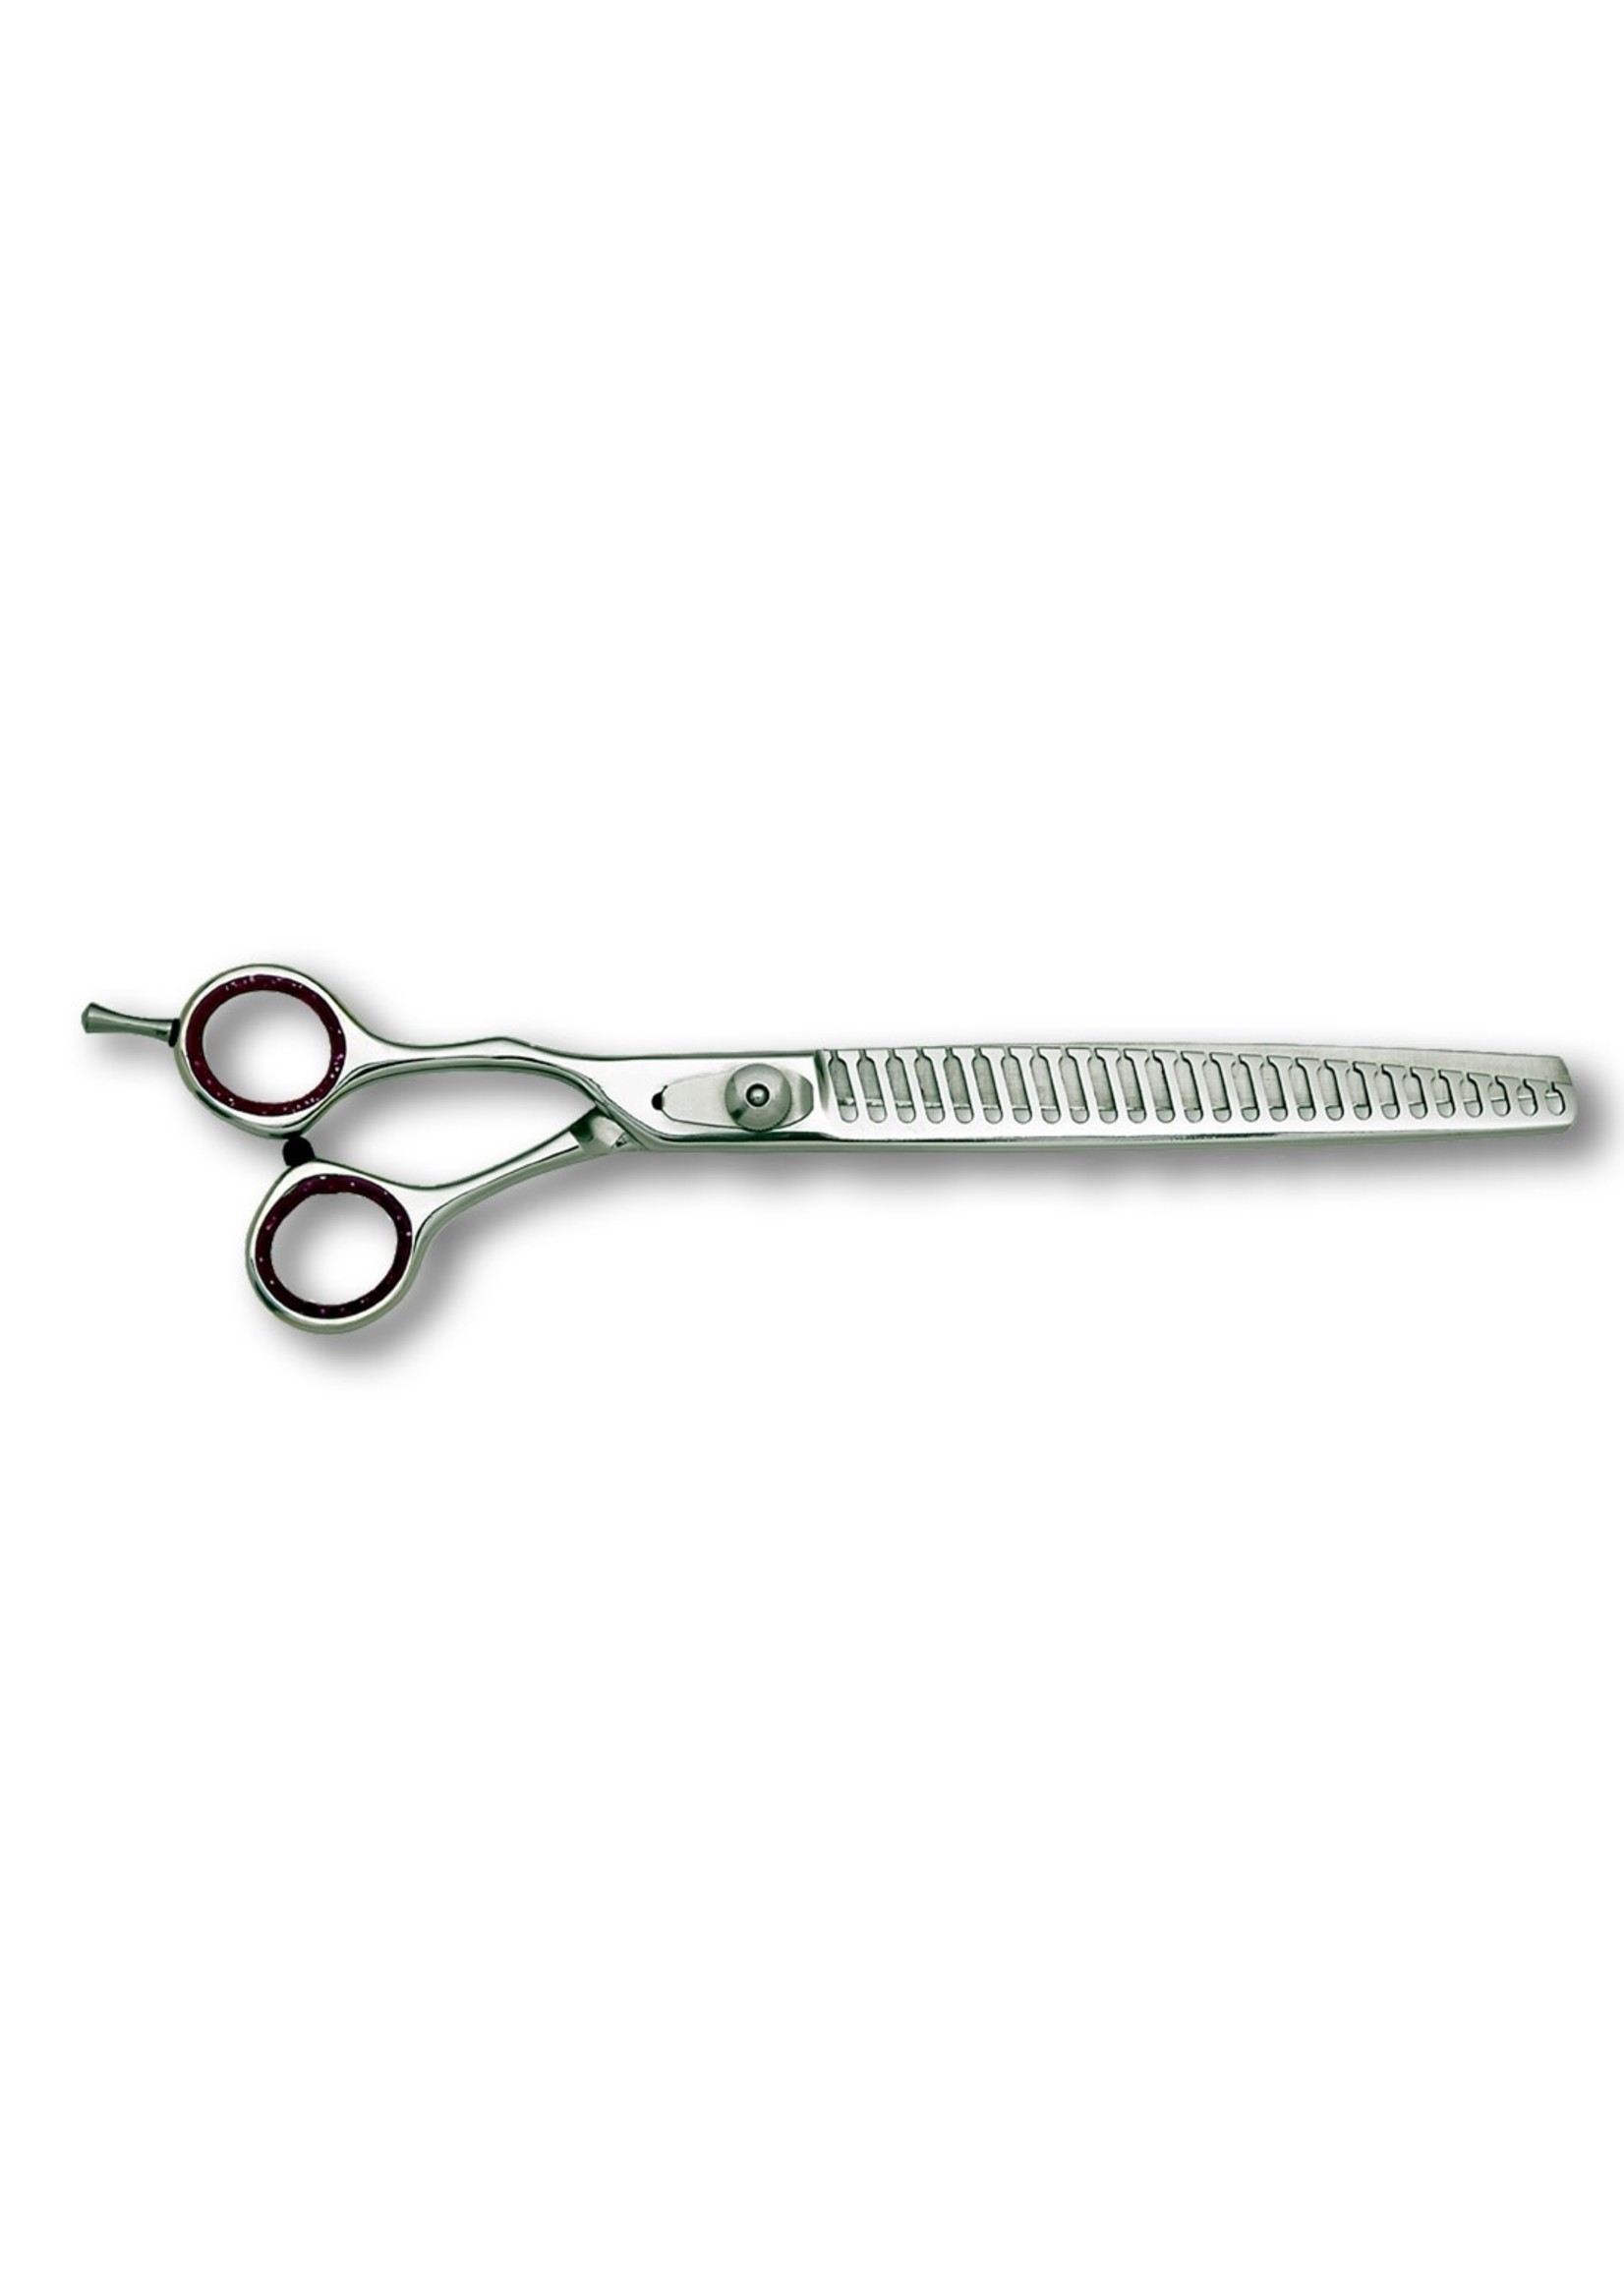 Geib Geib Entree 8.5" 26 Tooth Sculpting & Finishing Left Handed Shear